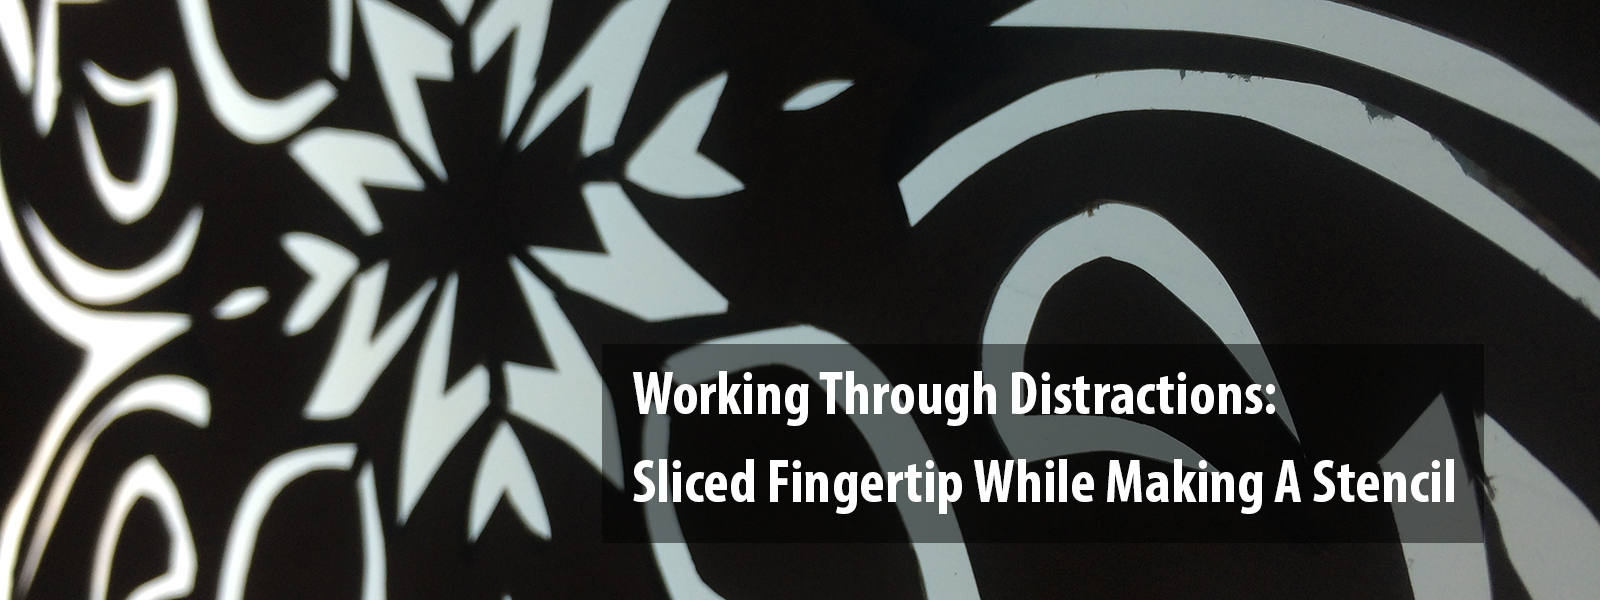 Working Through Distractions: Sliced Fingertip While Making A Stencil